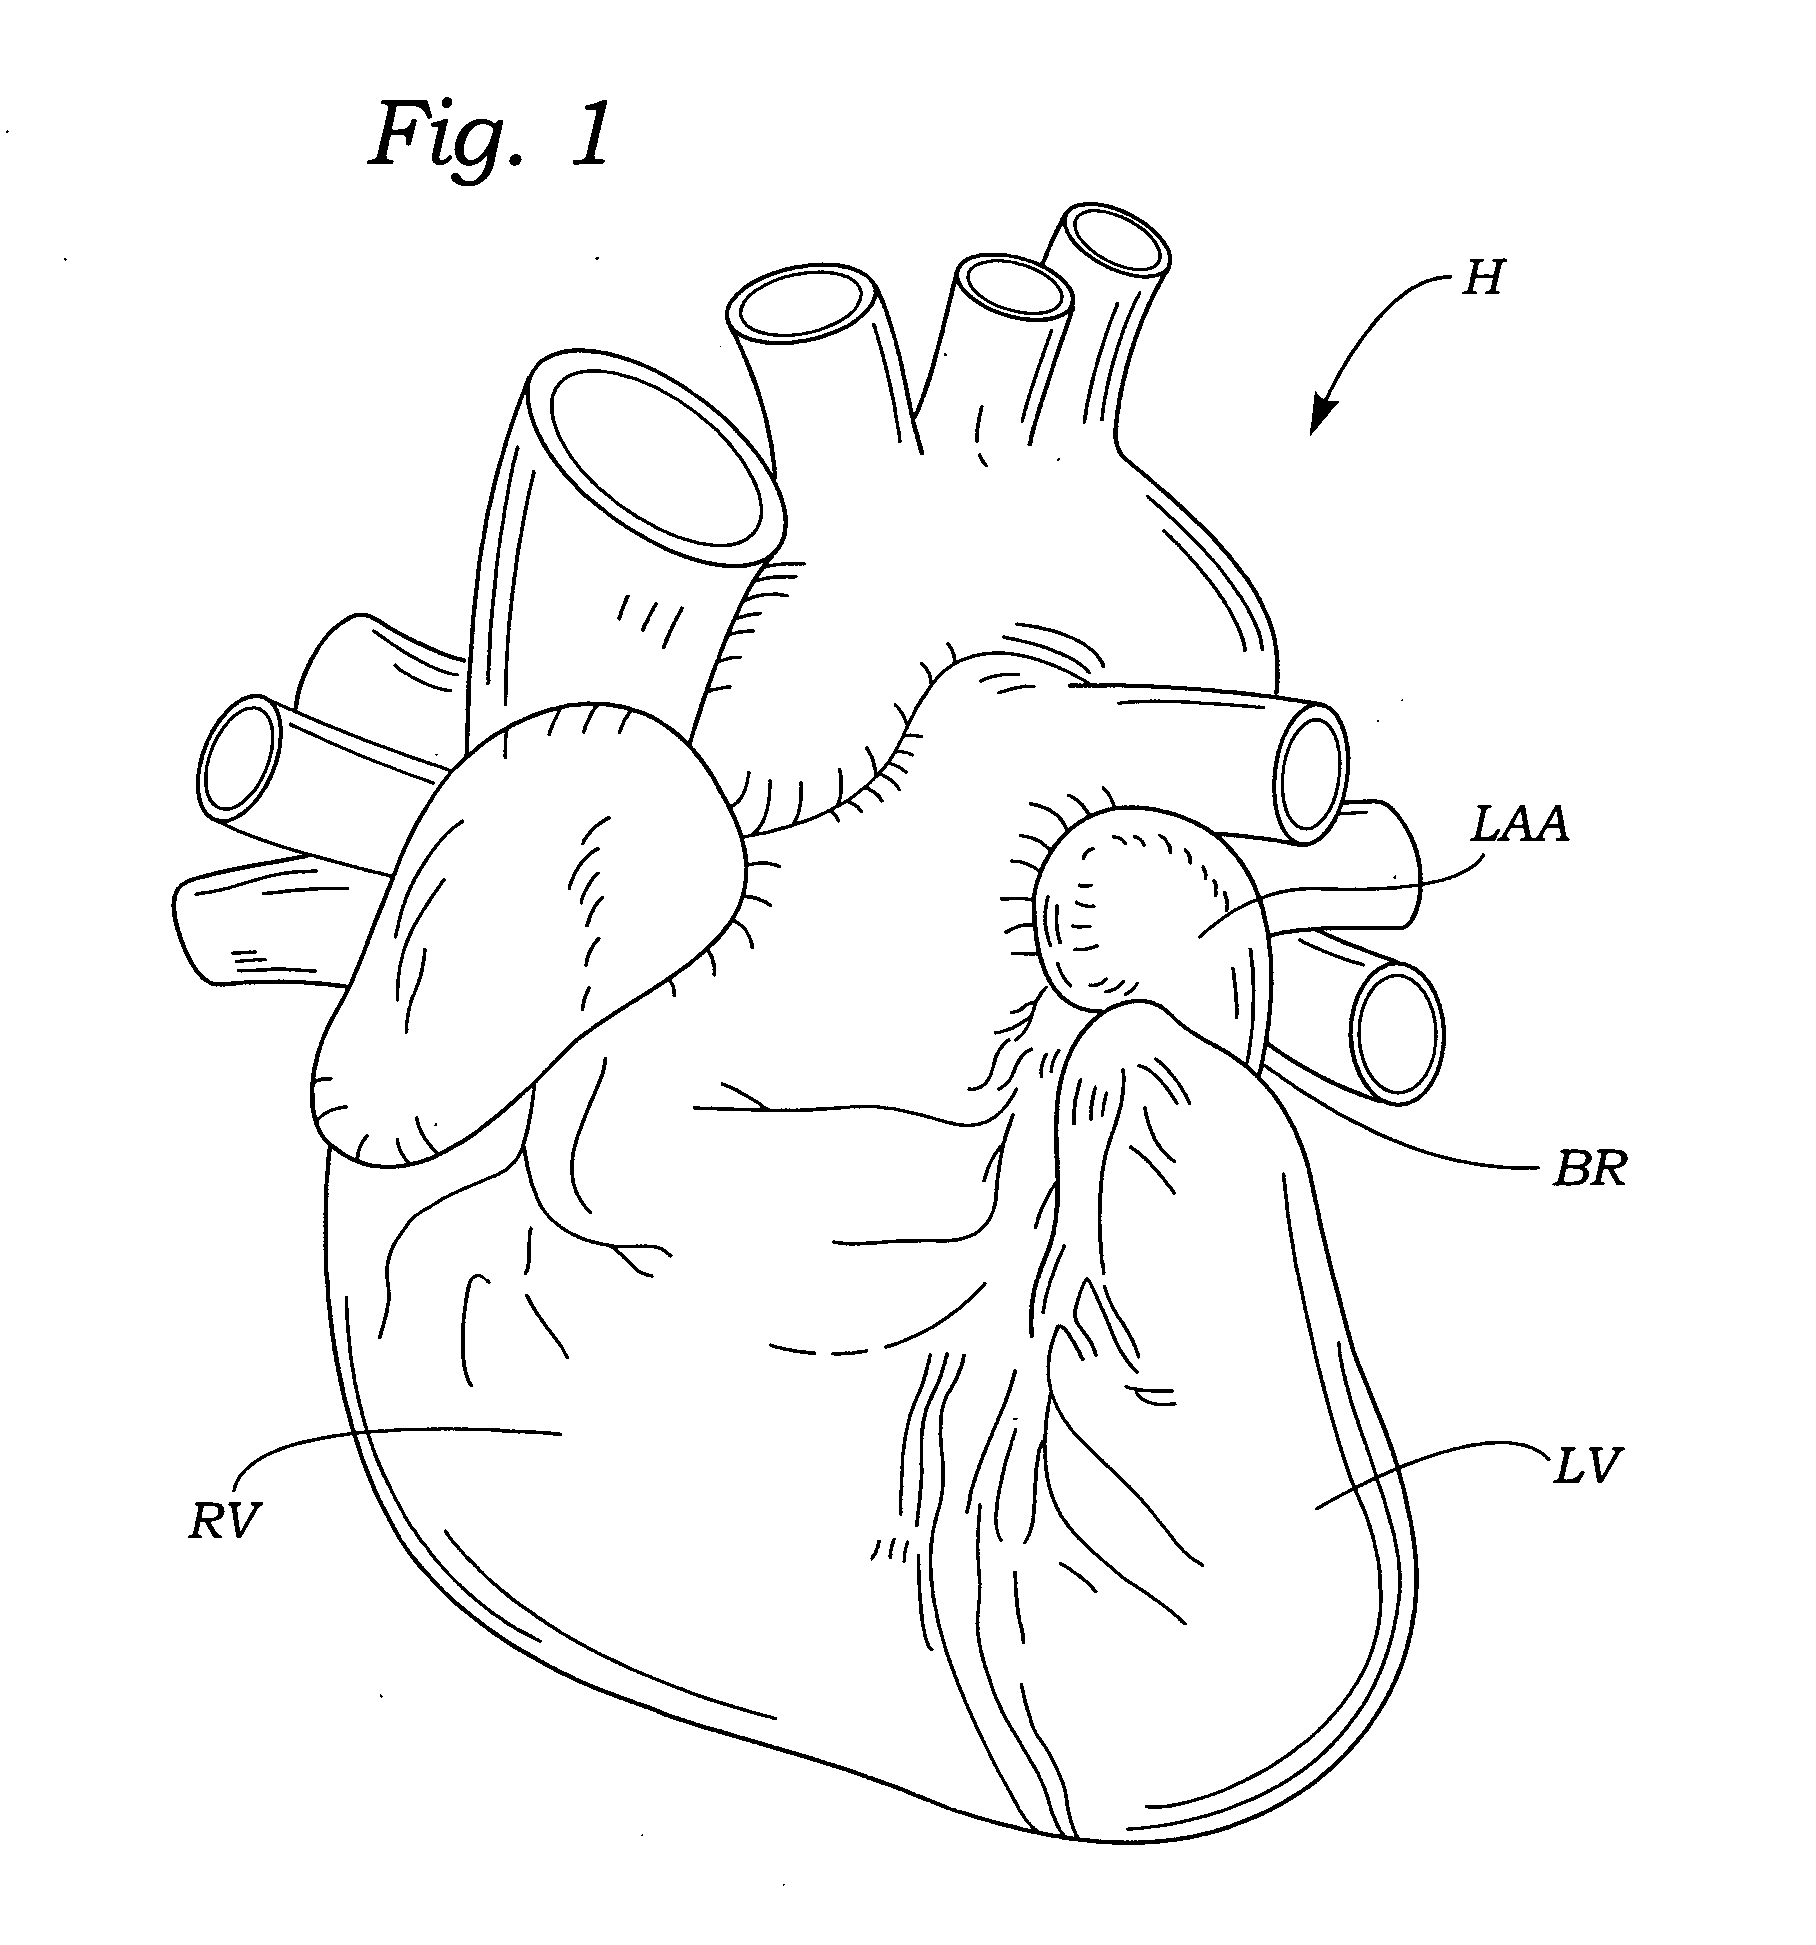 Left atrial appendage exclusion device